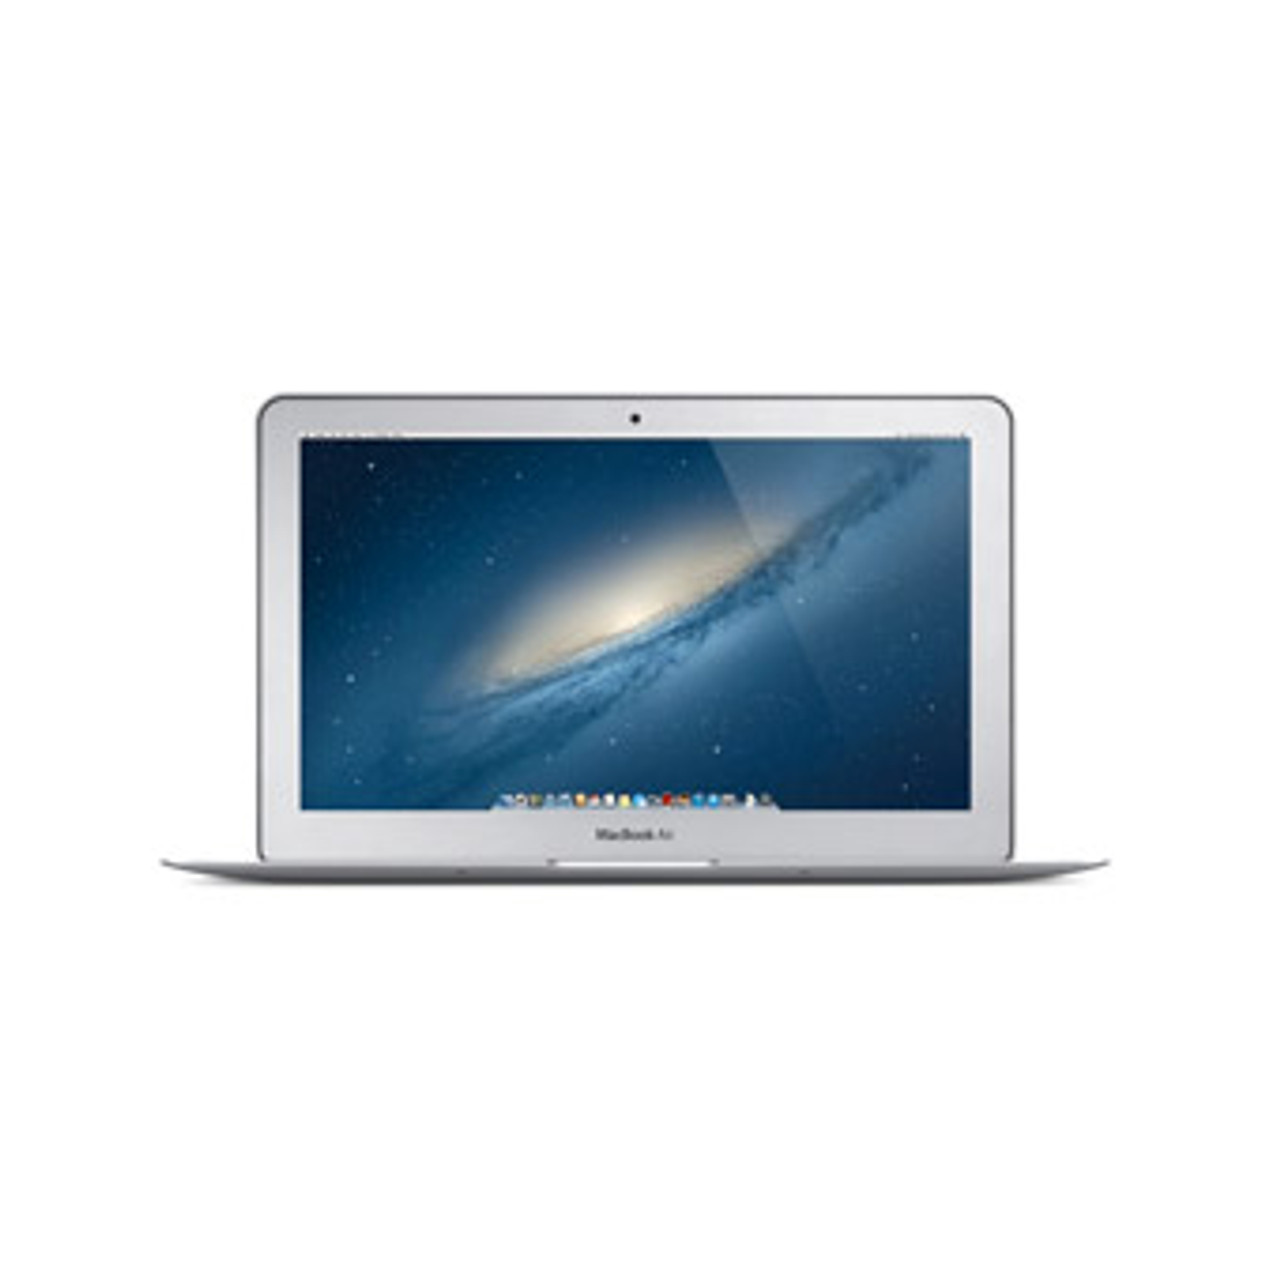 Apple MacBook Air 13-inch 1.4GHz Core i5 (Early 2014) MD760LL/B